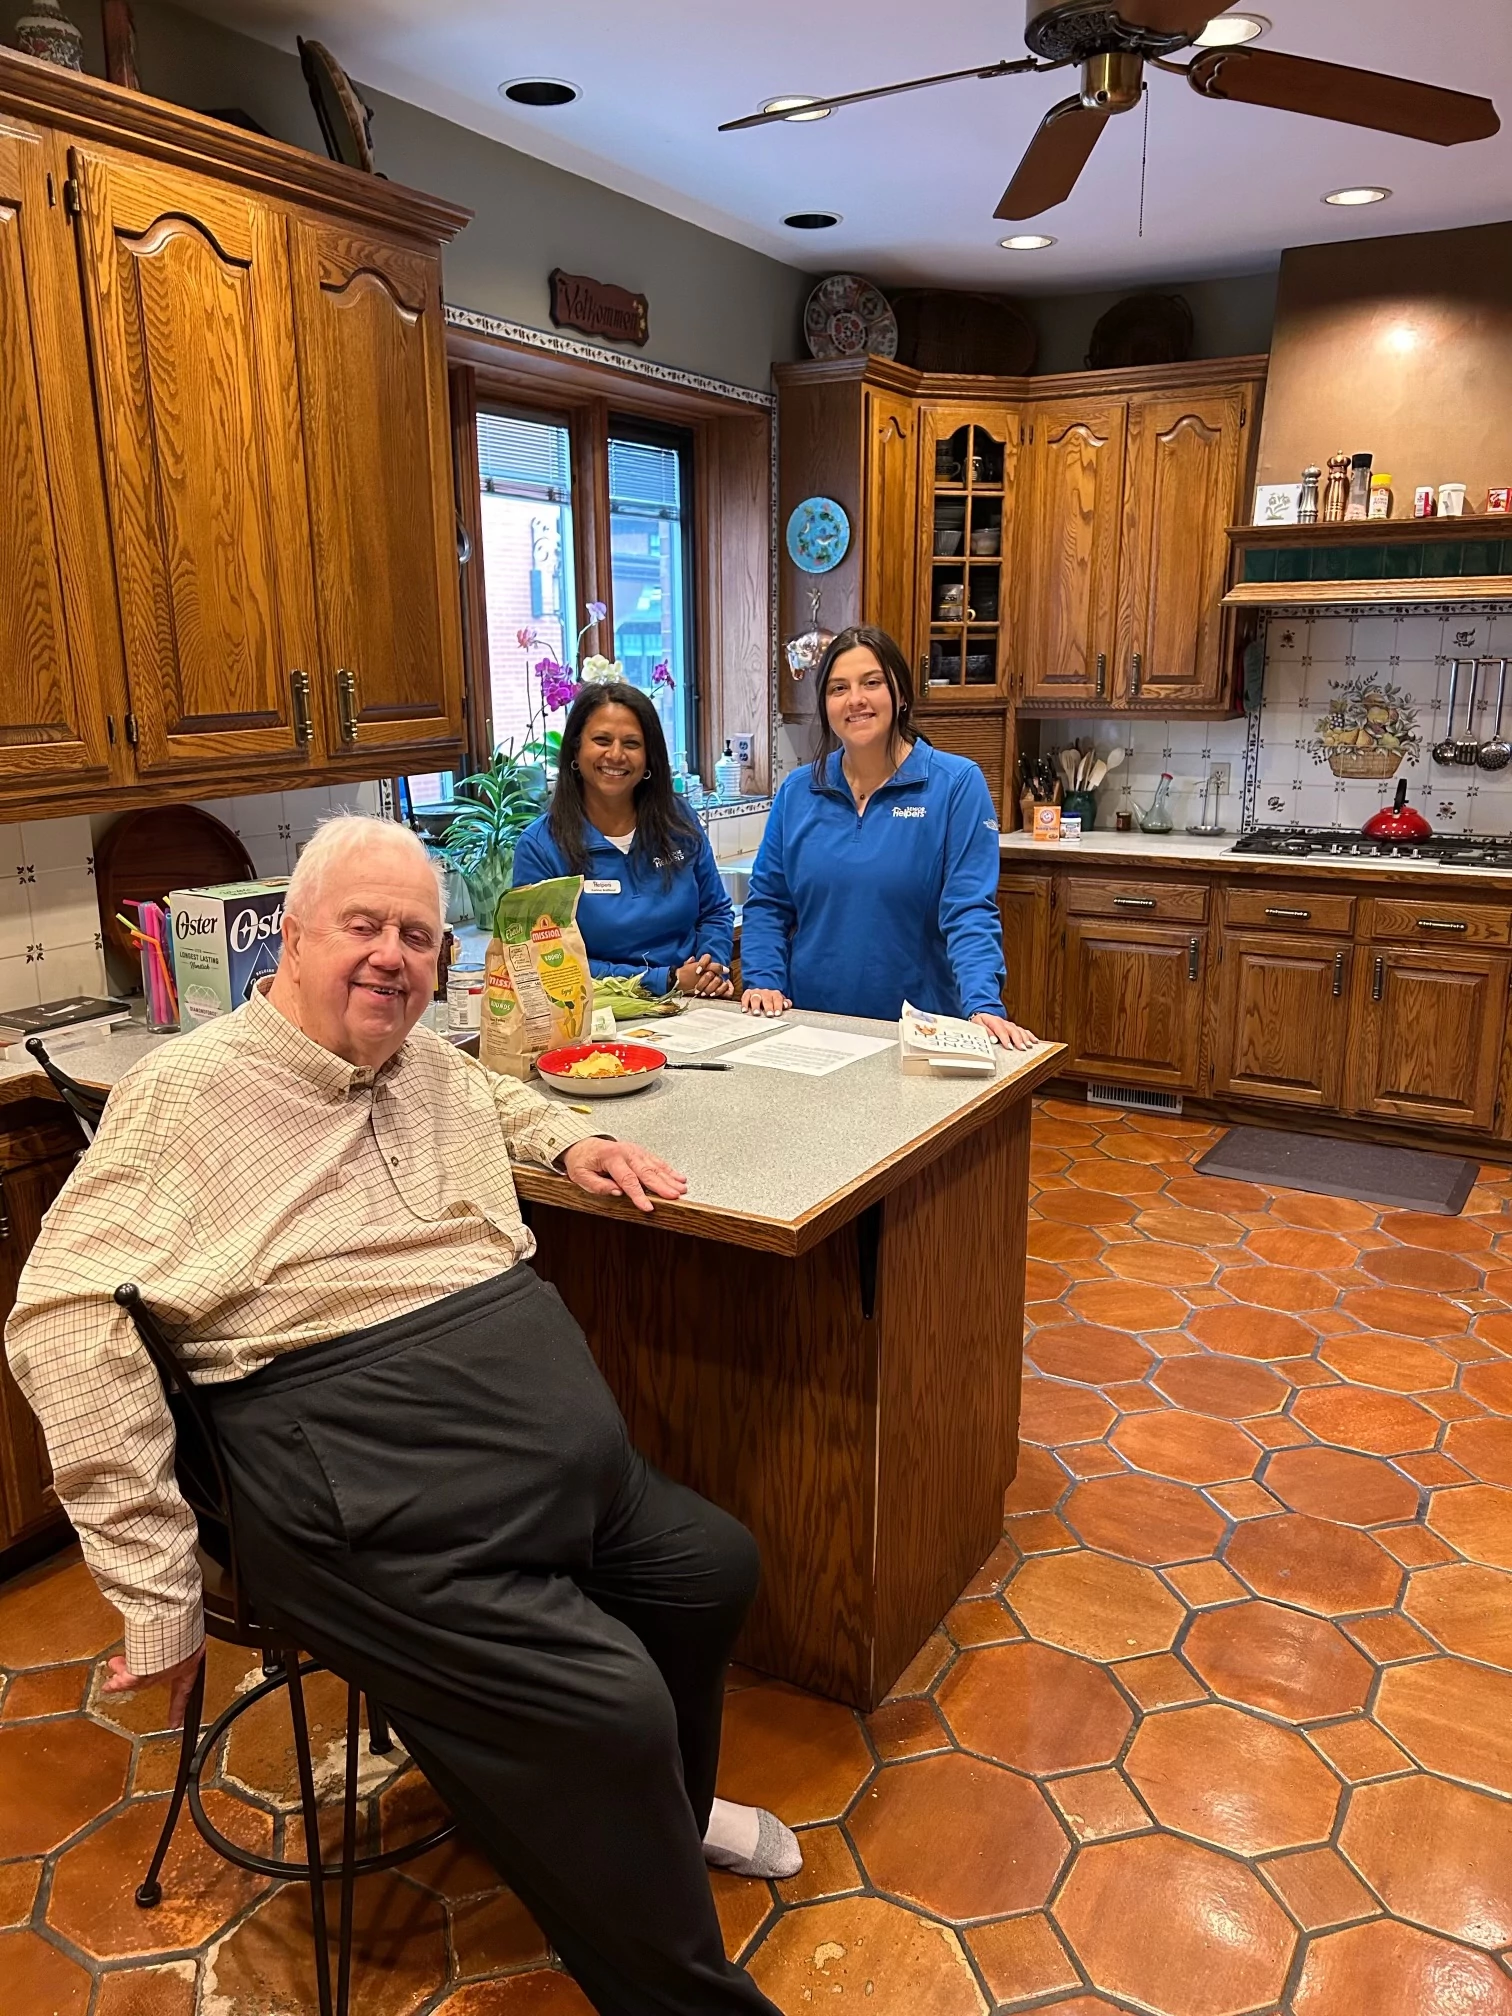 We got the special opportunity to cook for one of our favorite clients. We created a very special relationship with Ron & Dan.